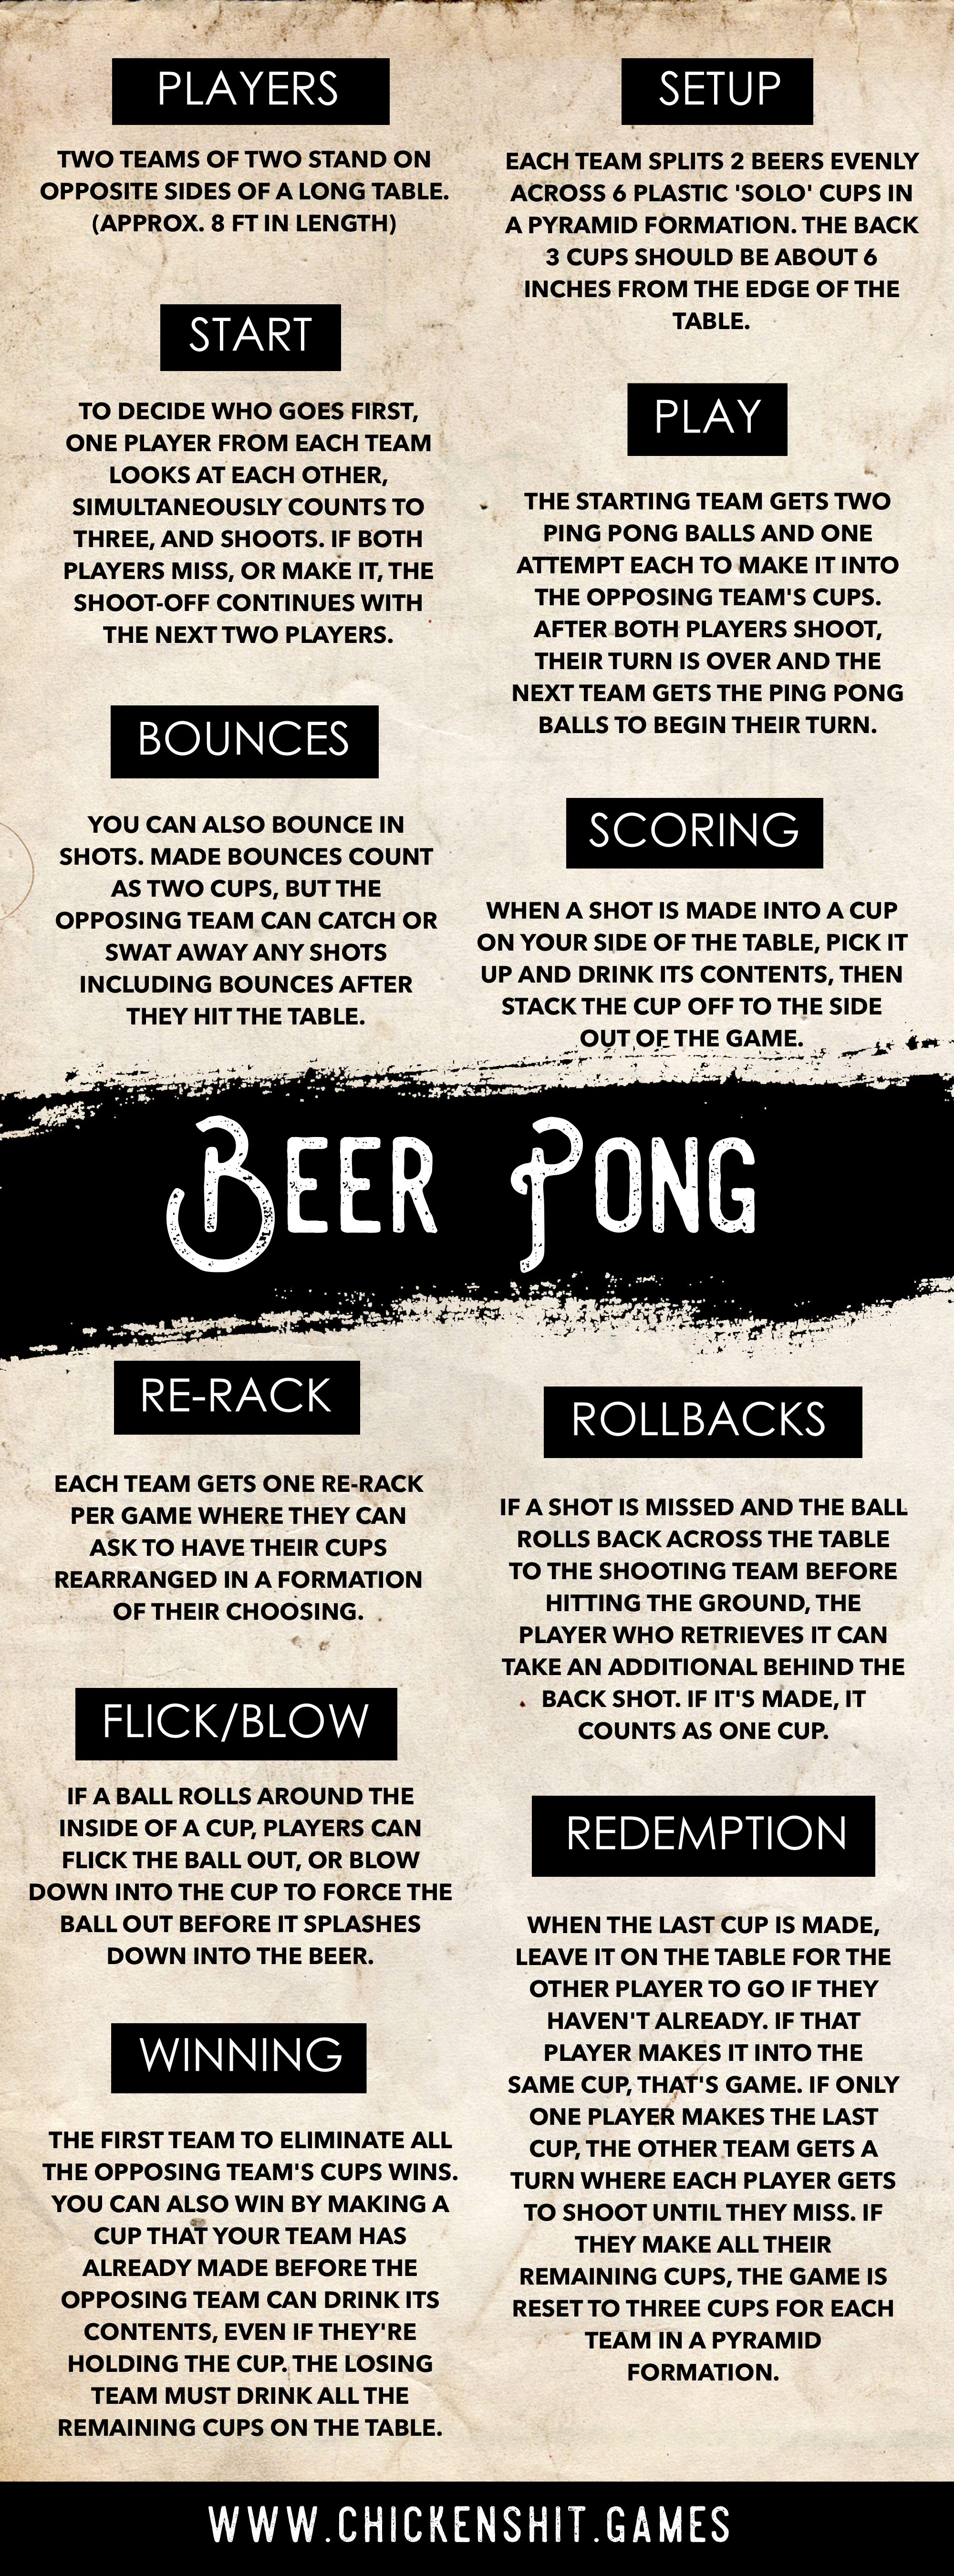 https://images.squarespace-cdn.com/content/v1/5a3aa85990bade9f351061ab/1587616705793-PLYUYGSATB6F5PAXDNFG/Beer+Pong+Rules.png